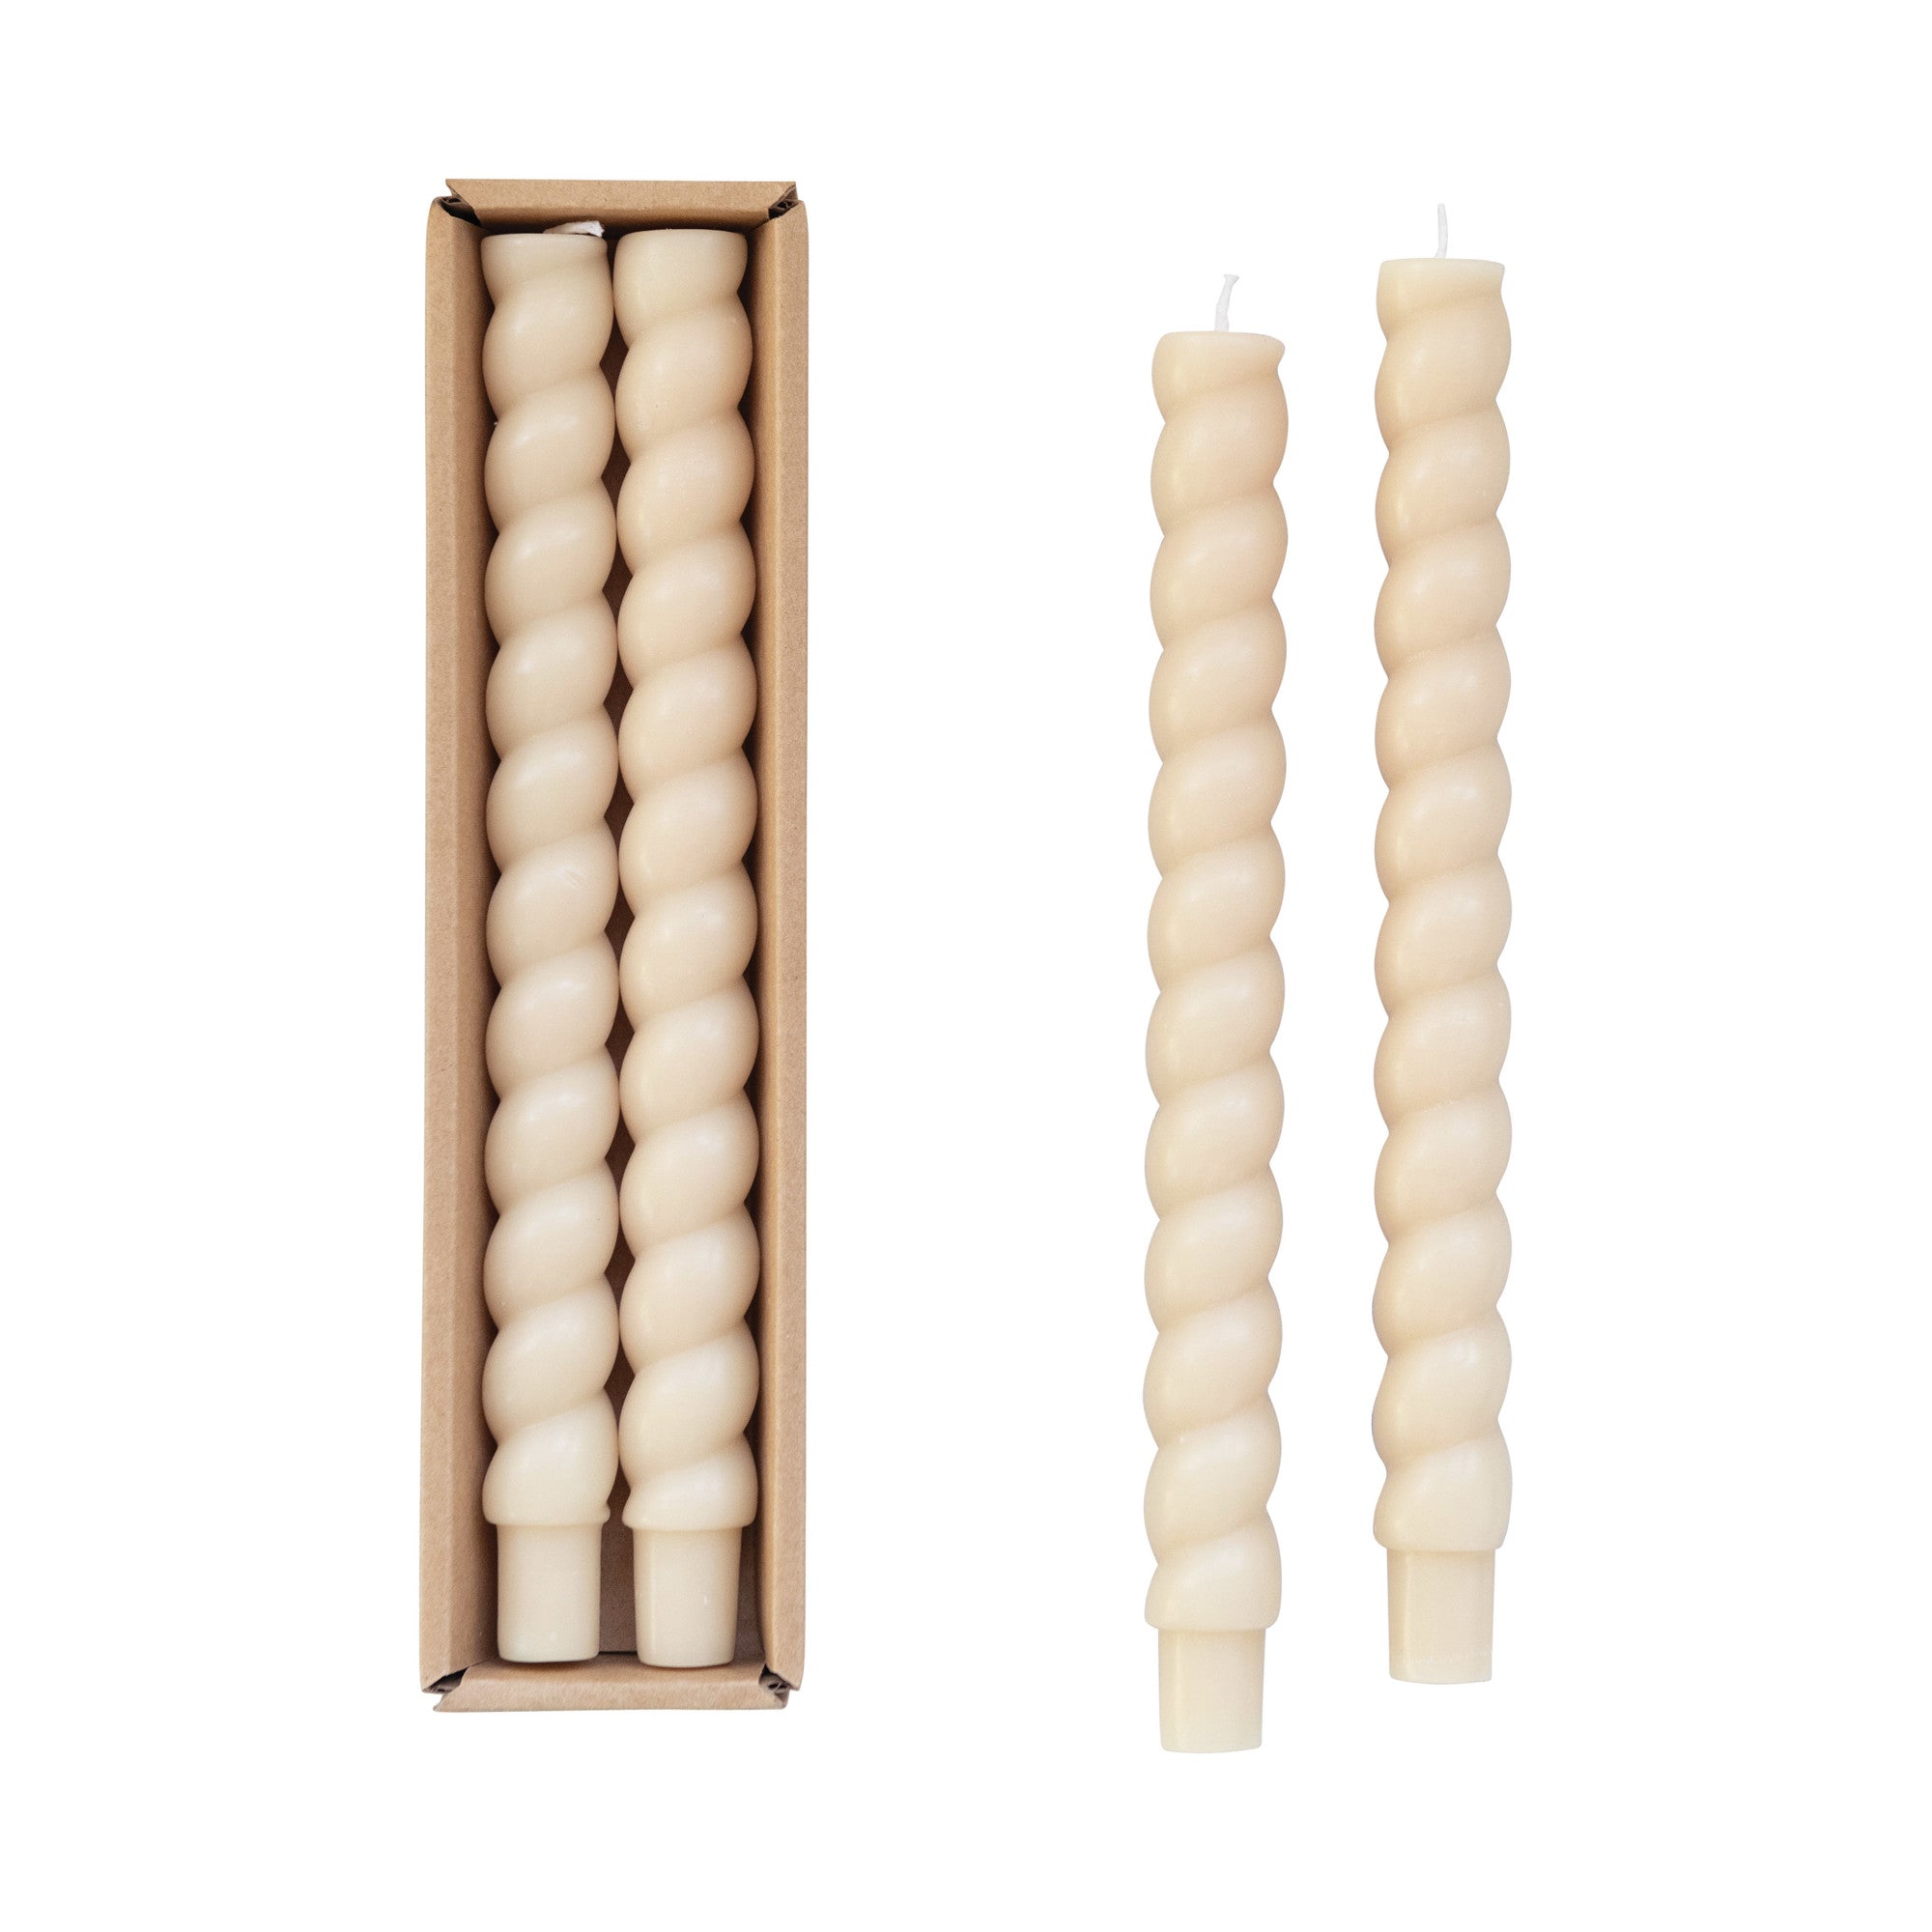 10"H Unscented Twisted Taper Candles (2) Cream